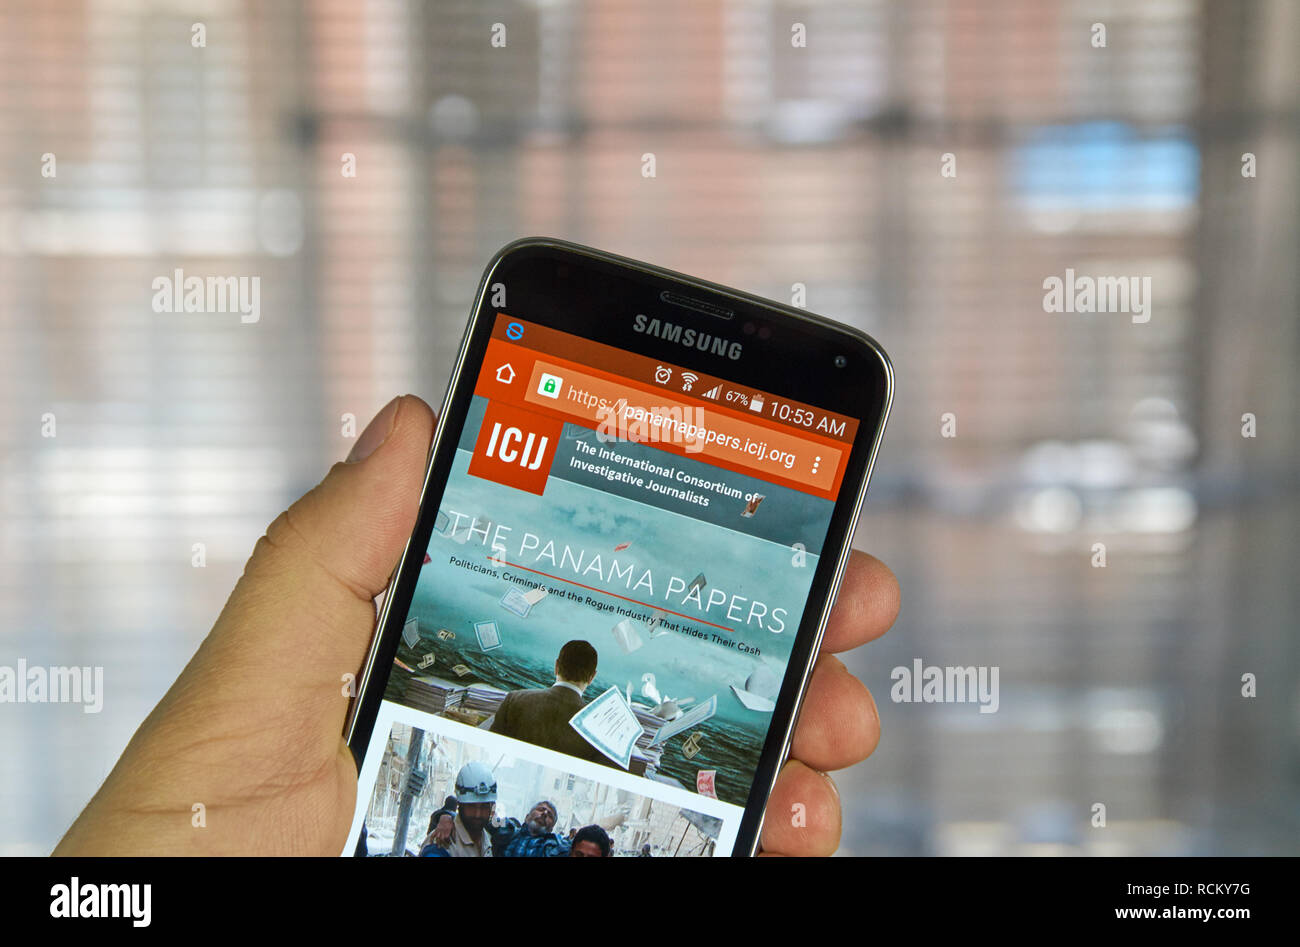 MONTREAL, CANADA - APRIL 5, 2016 : ICIJ web page on mobile phone. ICIJ is International Consortium of Investigative Journalists and well known for The Stock Photo